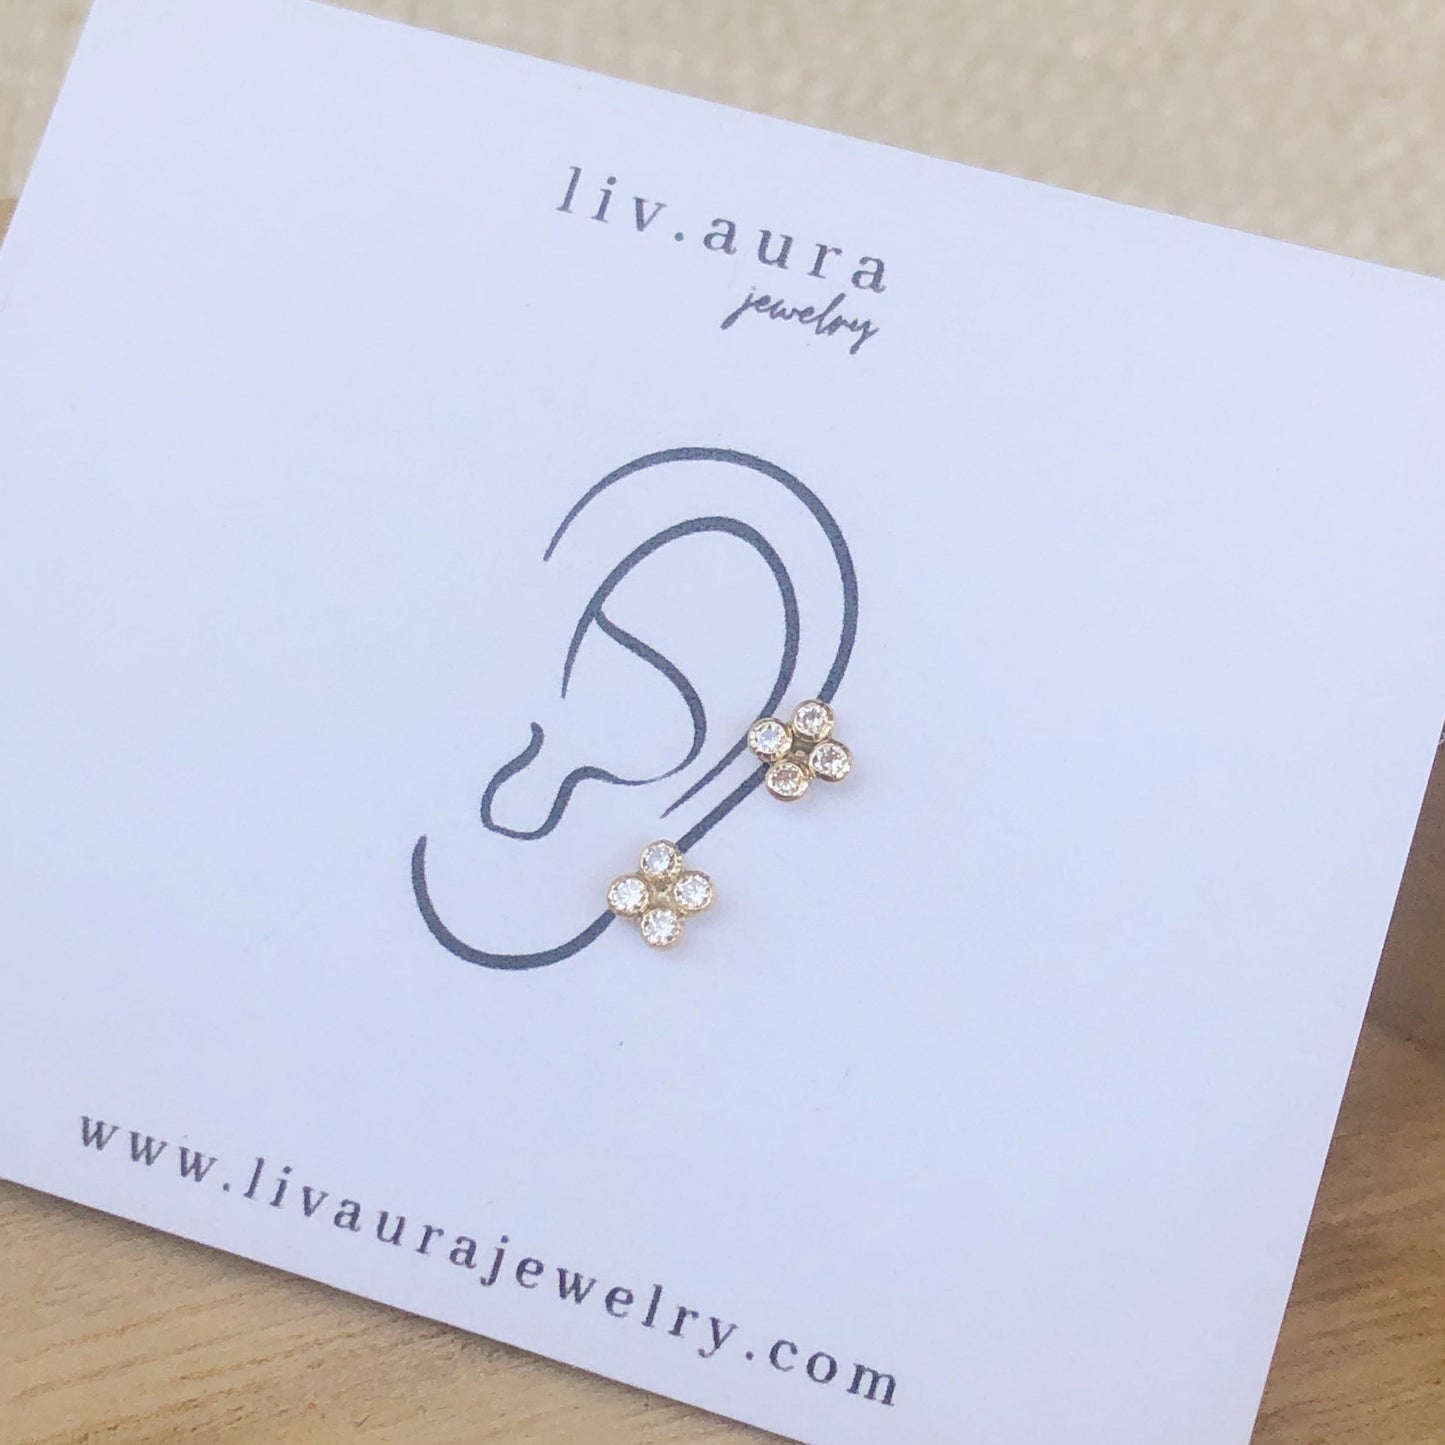 Add a touch of texture and style with these Clover Earrings. Made of 10K gold and featuring a simple geometric design